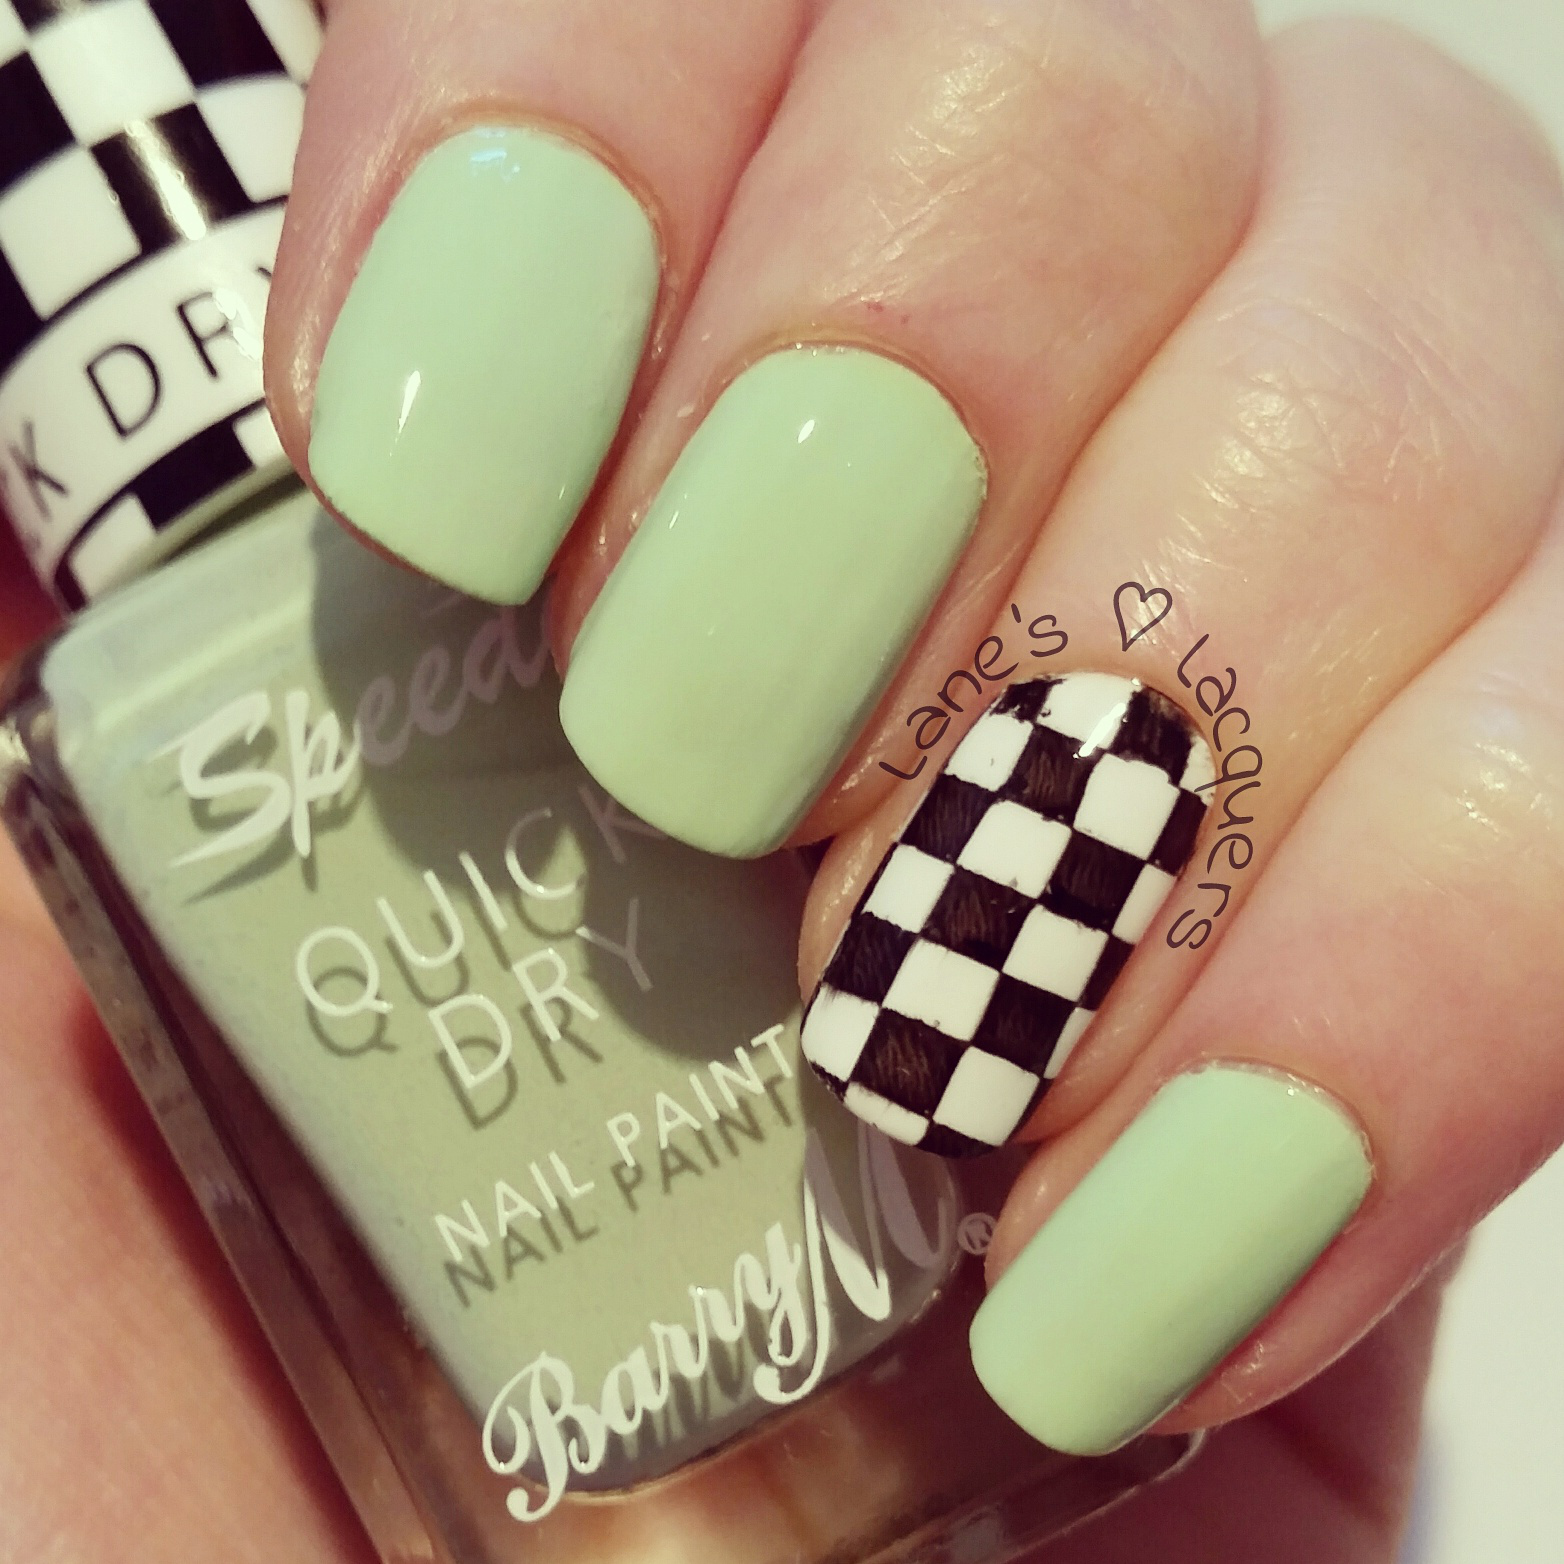 new-barry-m-speedy-quick-dry-pole-position-swatch-manicure (2)